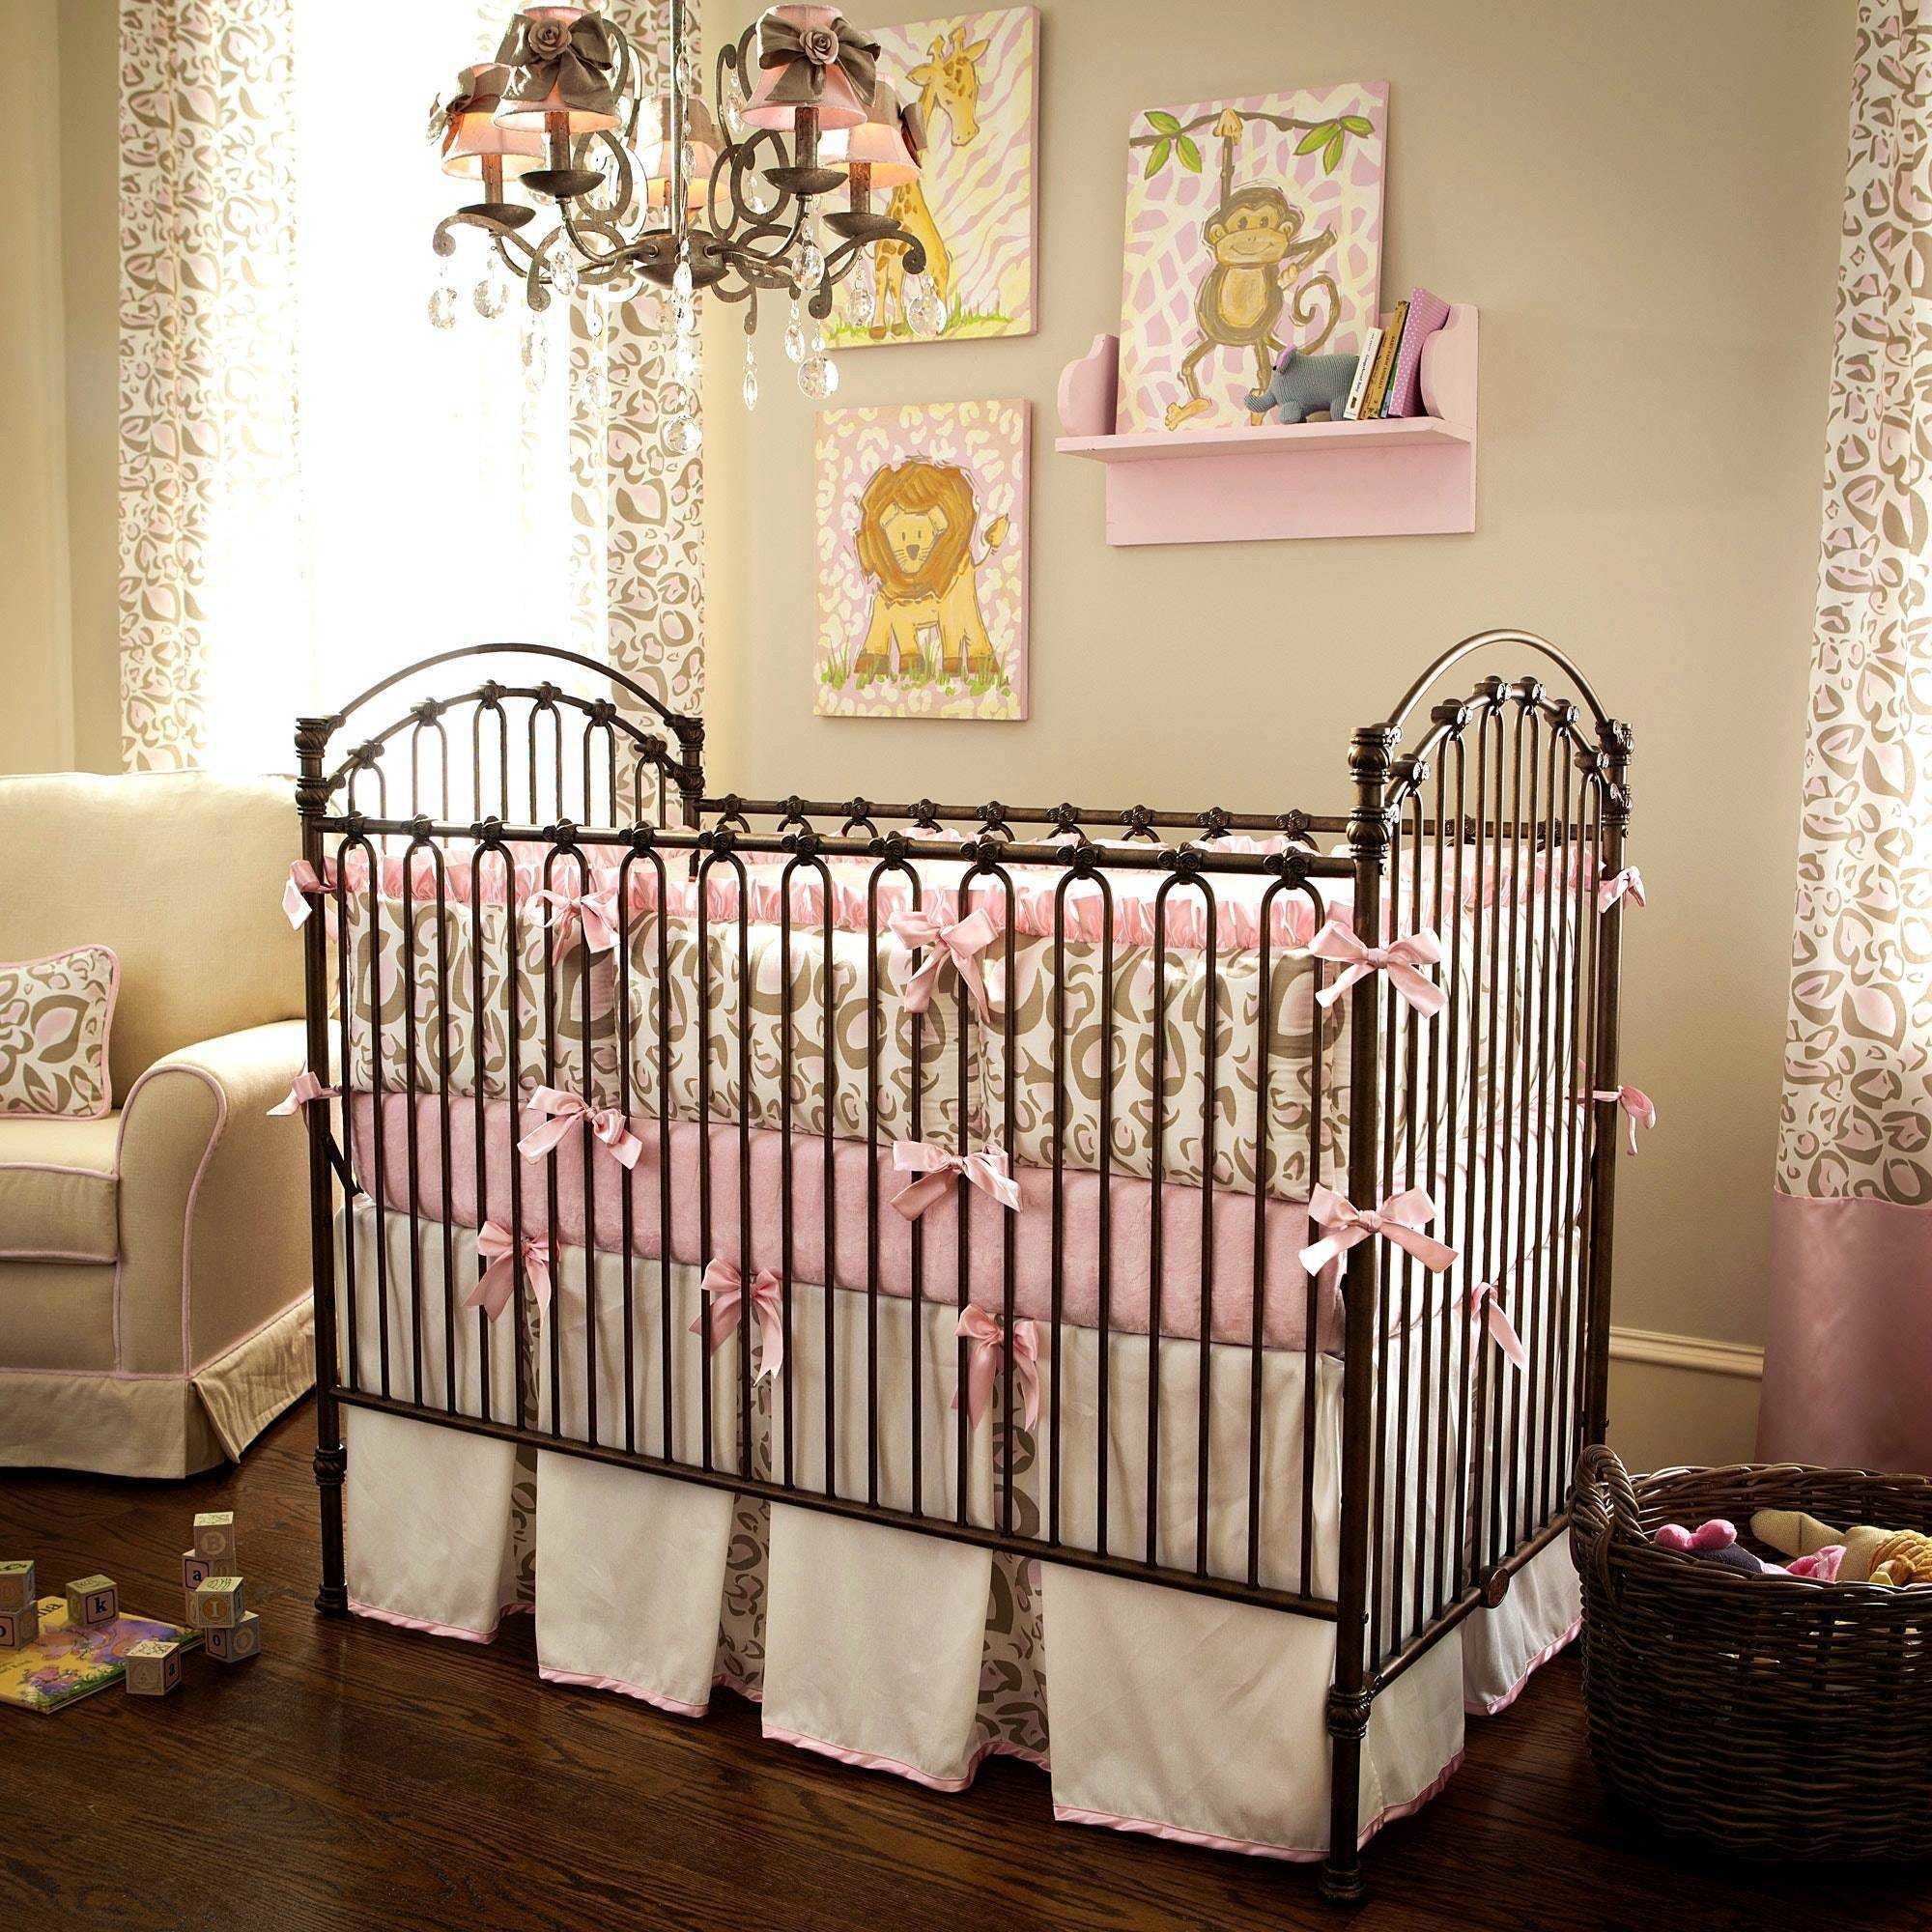 2000x2000 Tumblr cute room ideas for girls luxury frantic baby boy rooms baby room  sayings baby room